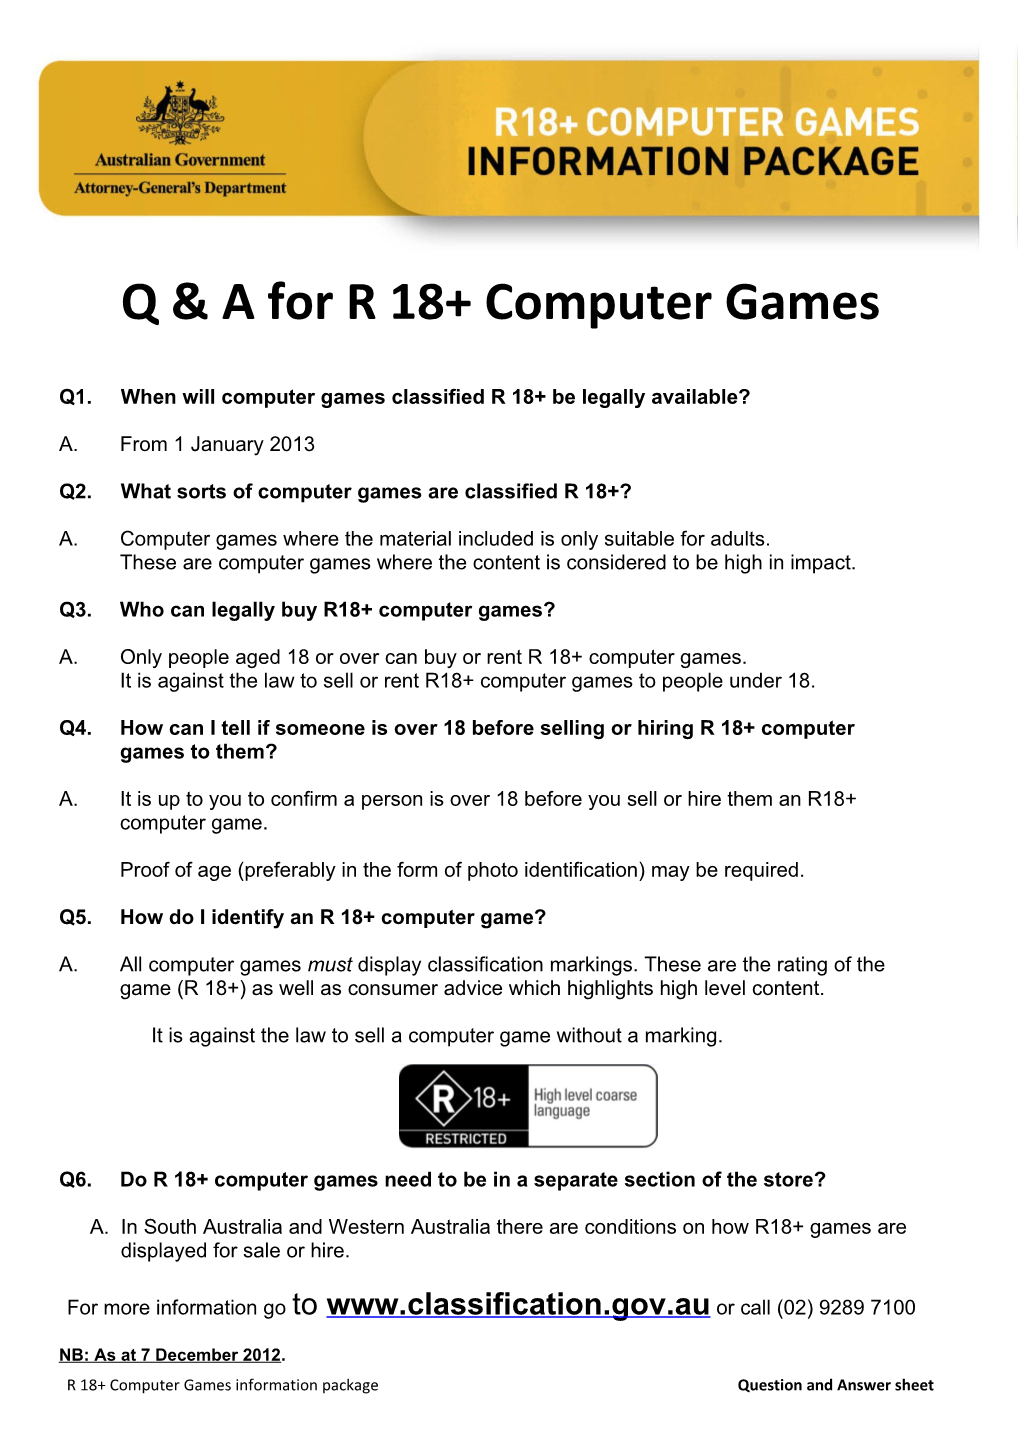 R18+ Computer Games Information Package